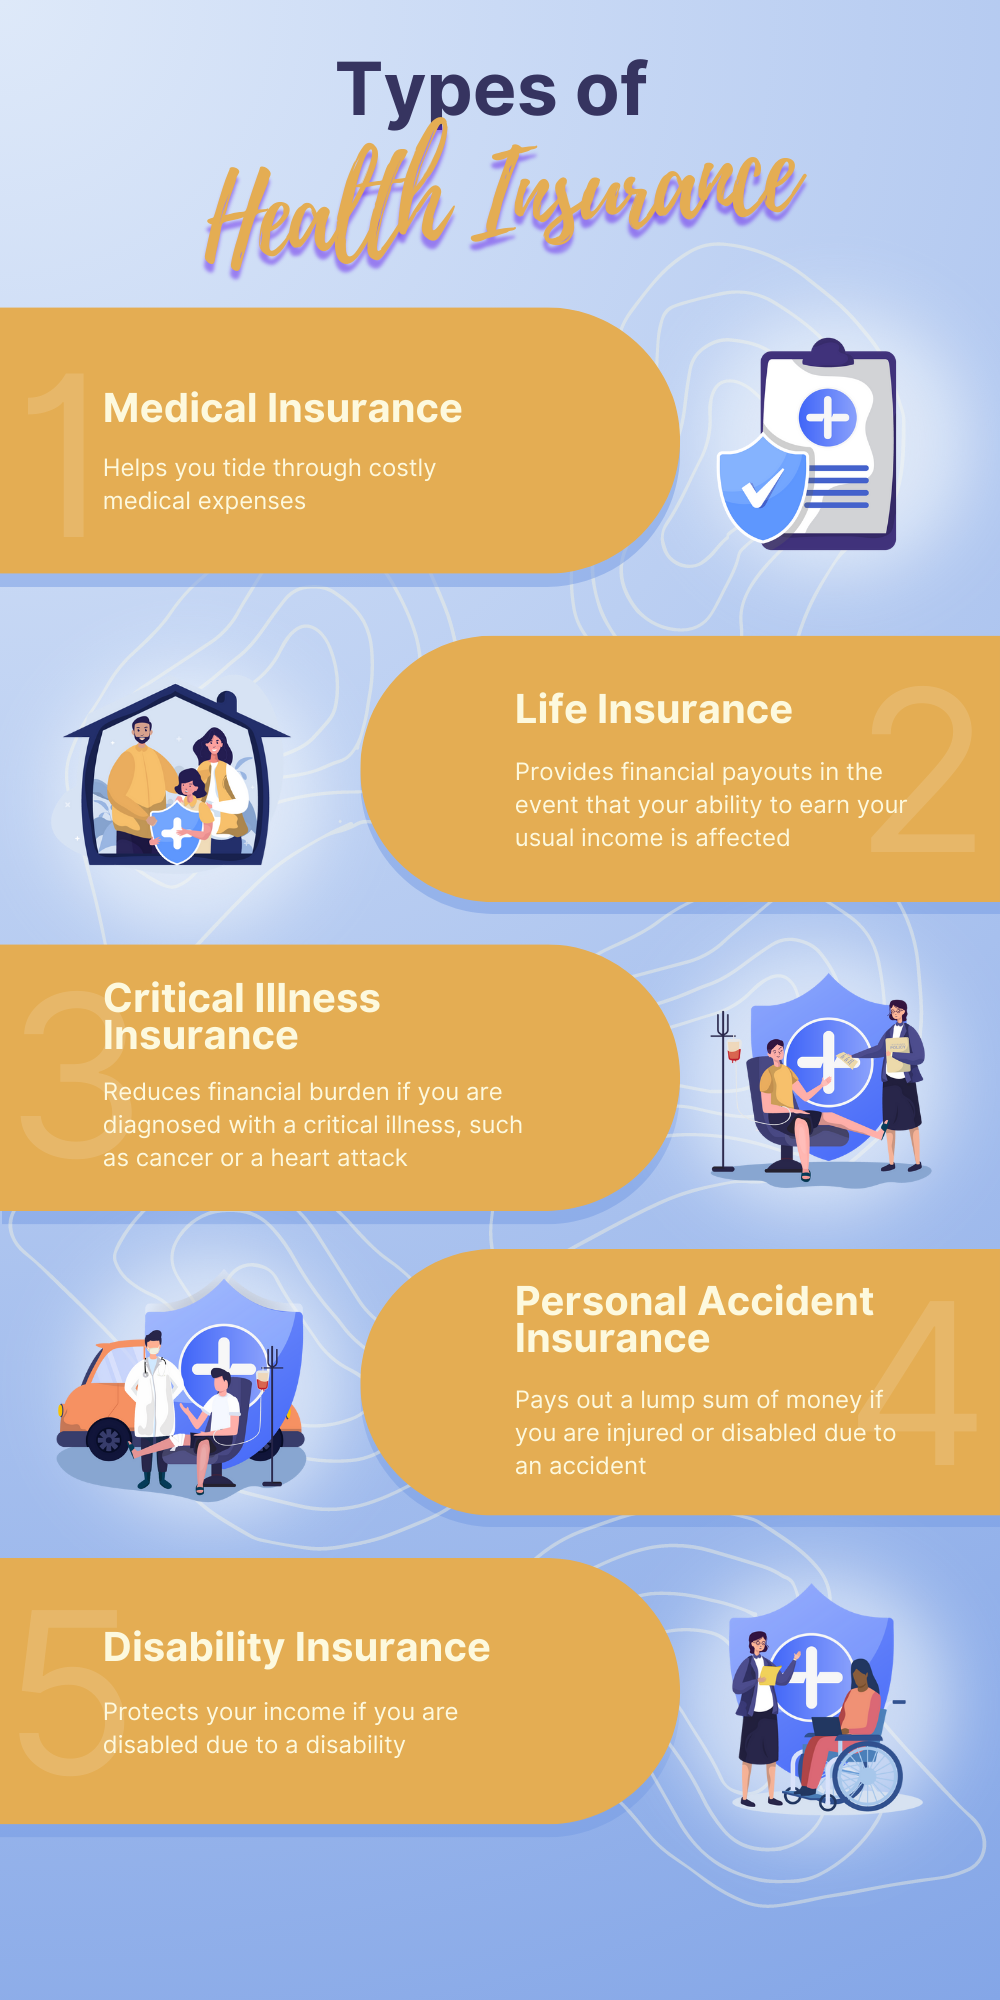 Types of health insurance in Singapore